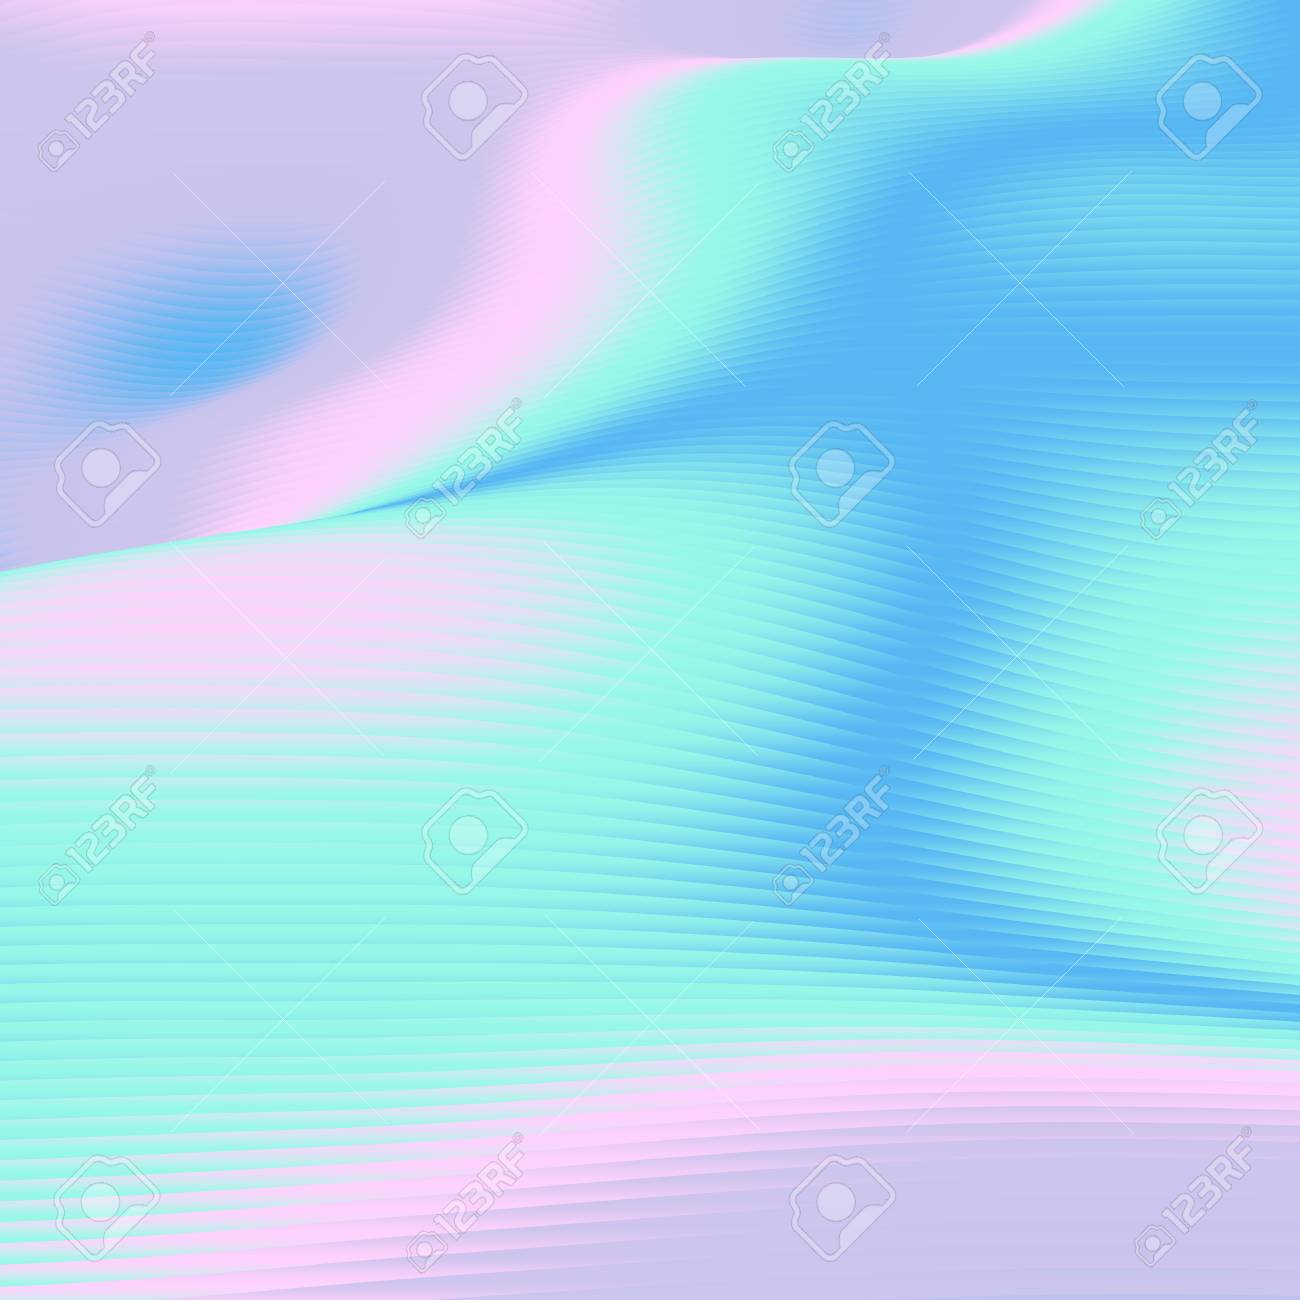 Abstract Colorful Wavy Background In Bright Rainbow Colors Modern